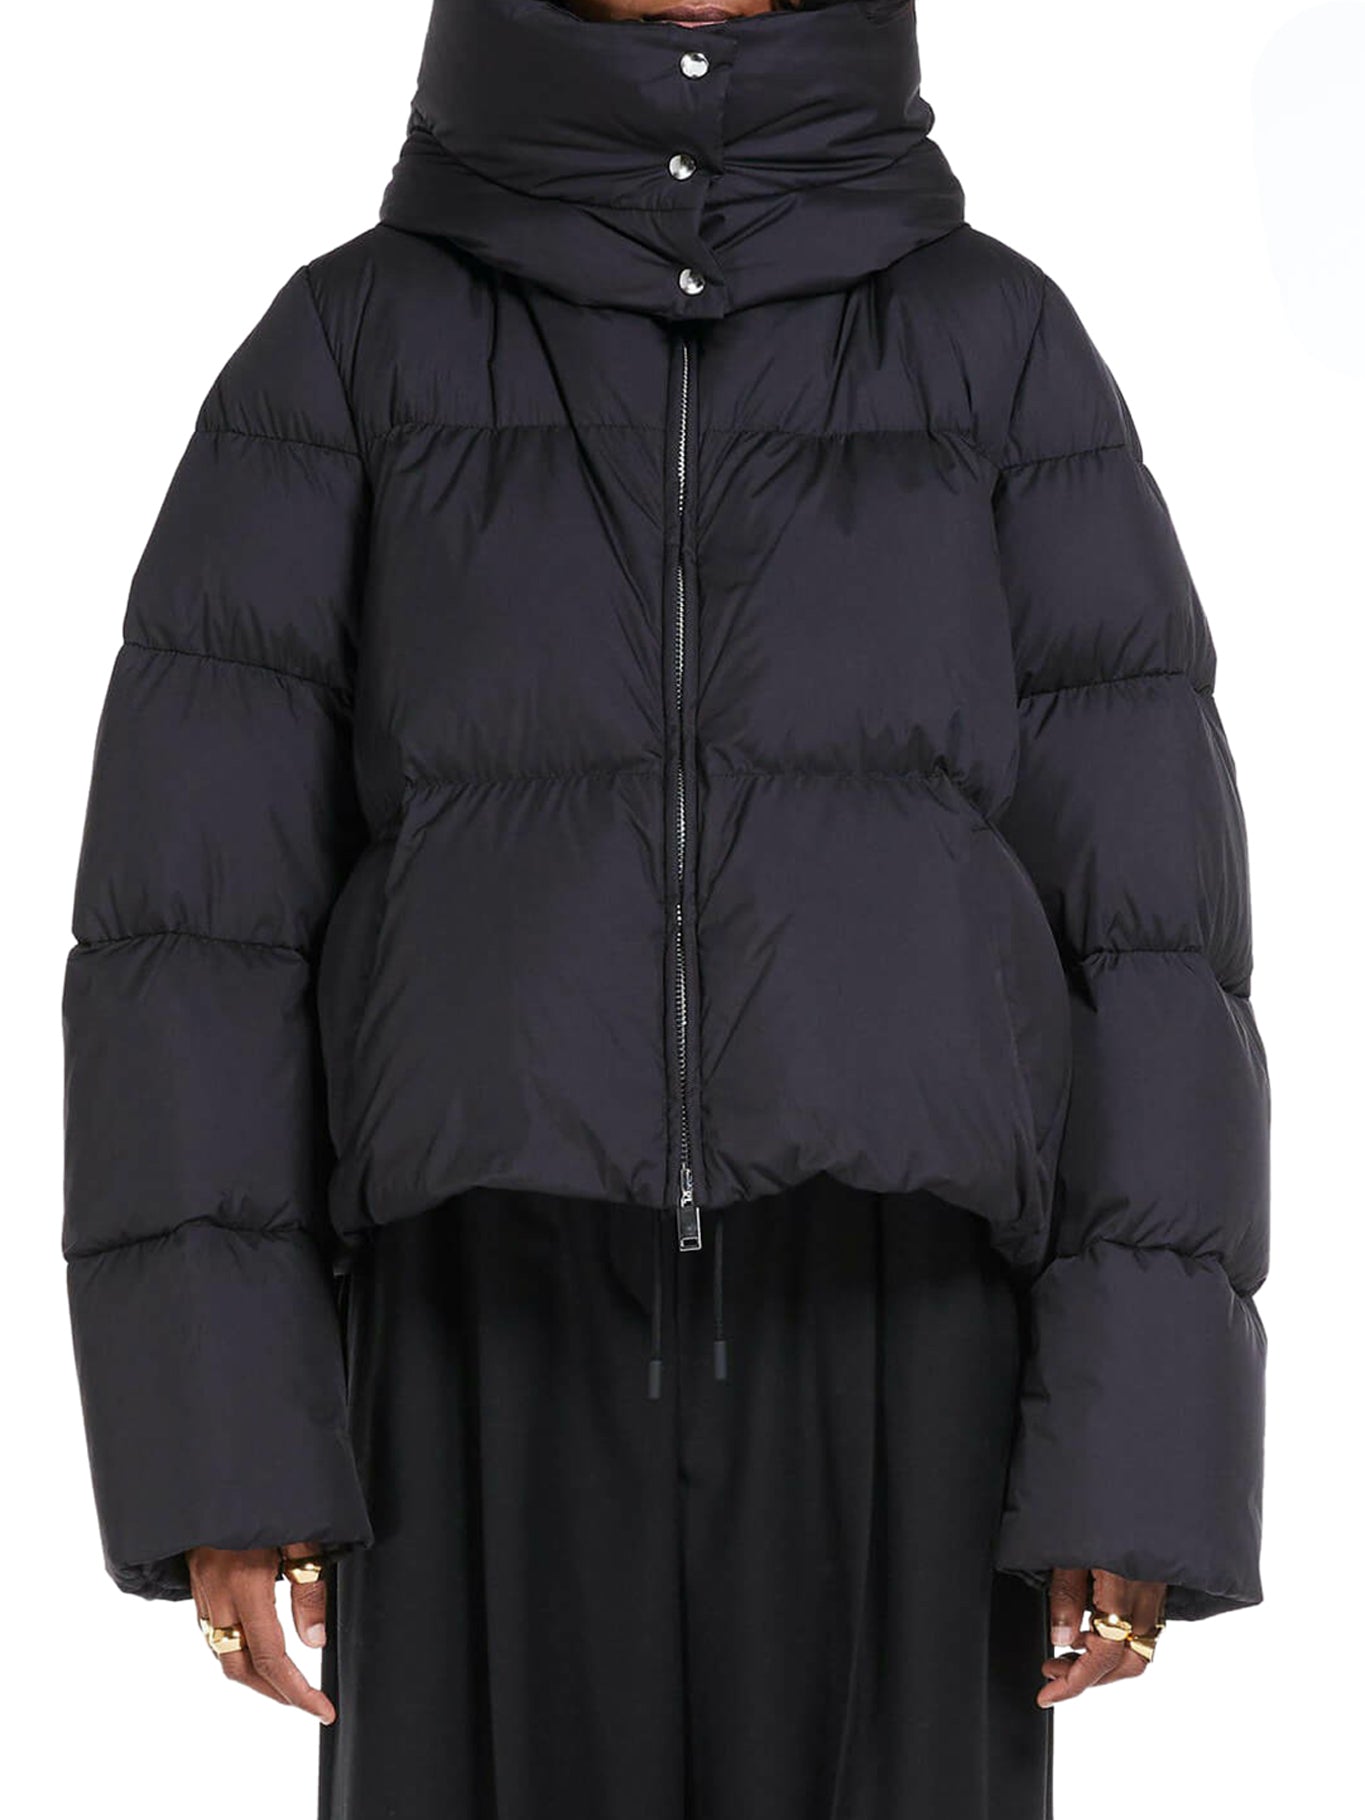 Quilted jacket Otaria in black